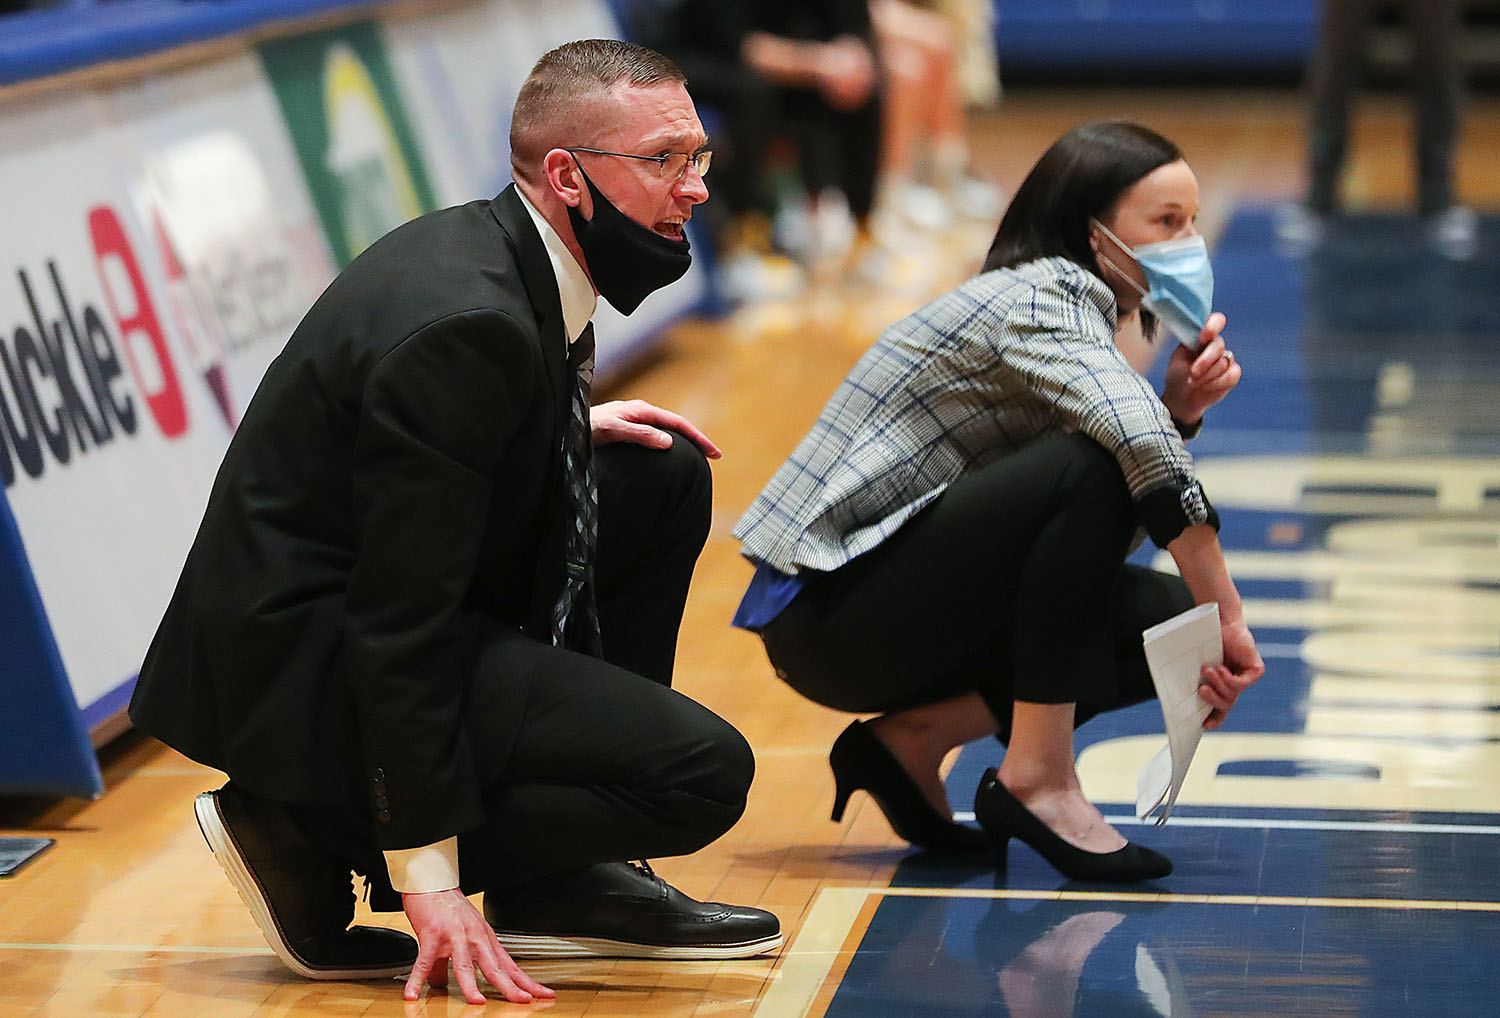 Devin and Carrie Eighmey lead the UNK women’s basketball team during a Jan. 28 home game against Fort Hays State. The Lopers (16-2) are ranked 13th nationally in the WBCA Coaches Poll and 15th in the D2SIDA Media Poll.